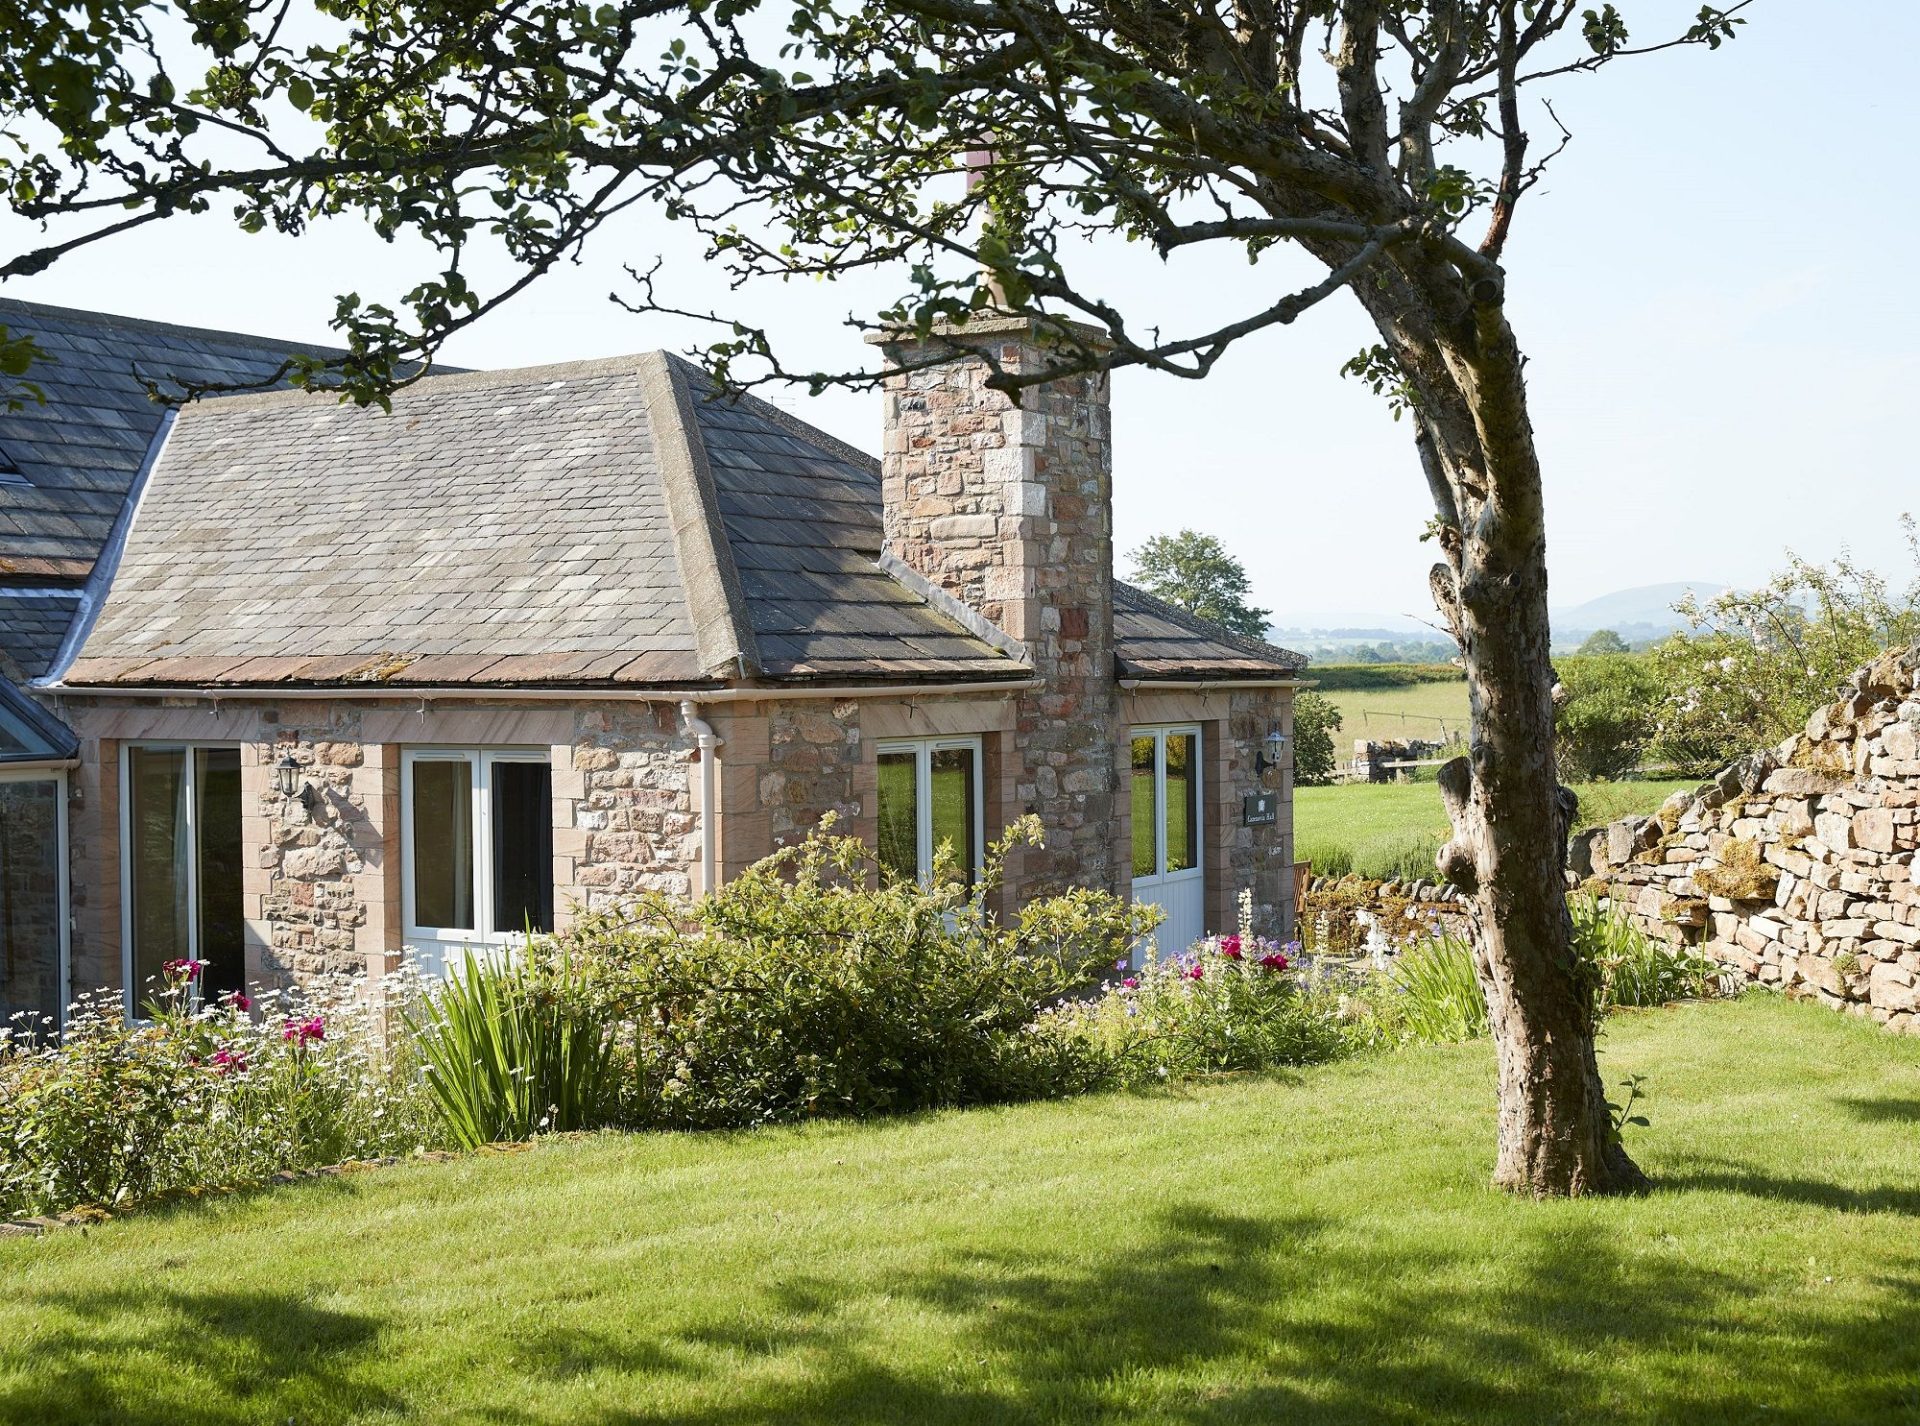 Cazenovia Hall luxury self catering holiday cottage with private garden children and dog friendly The Rowley Estates near Cumbria and Lake District